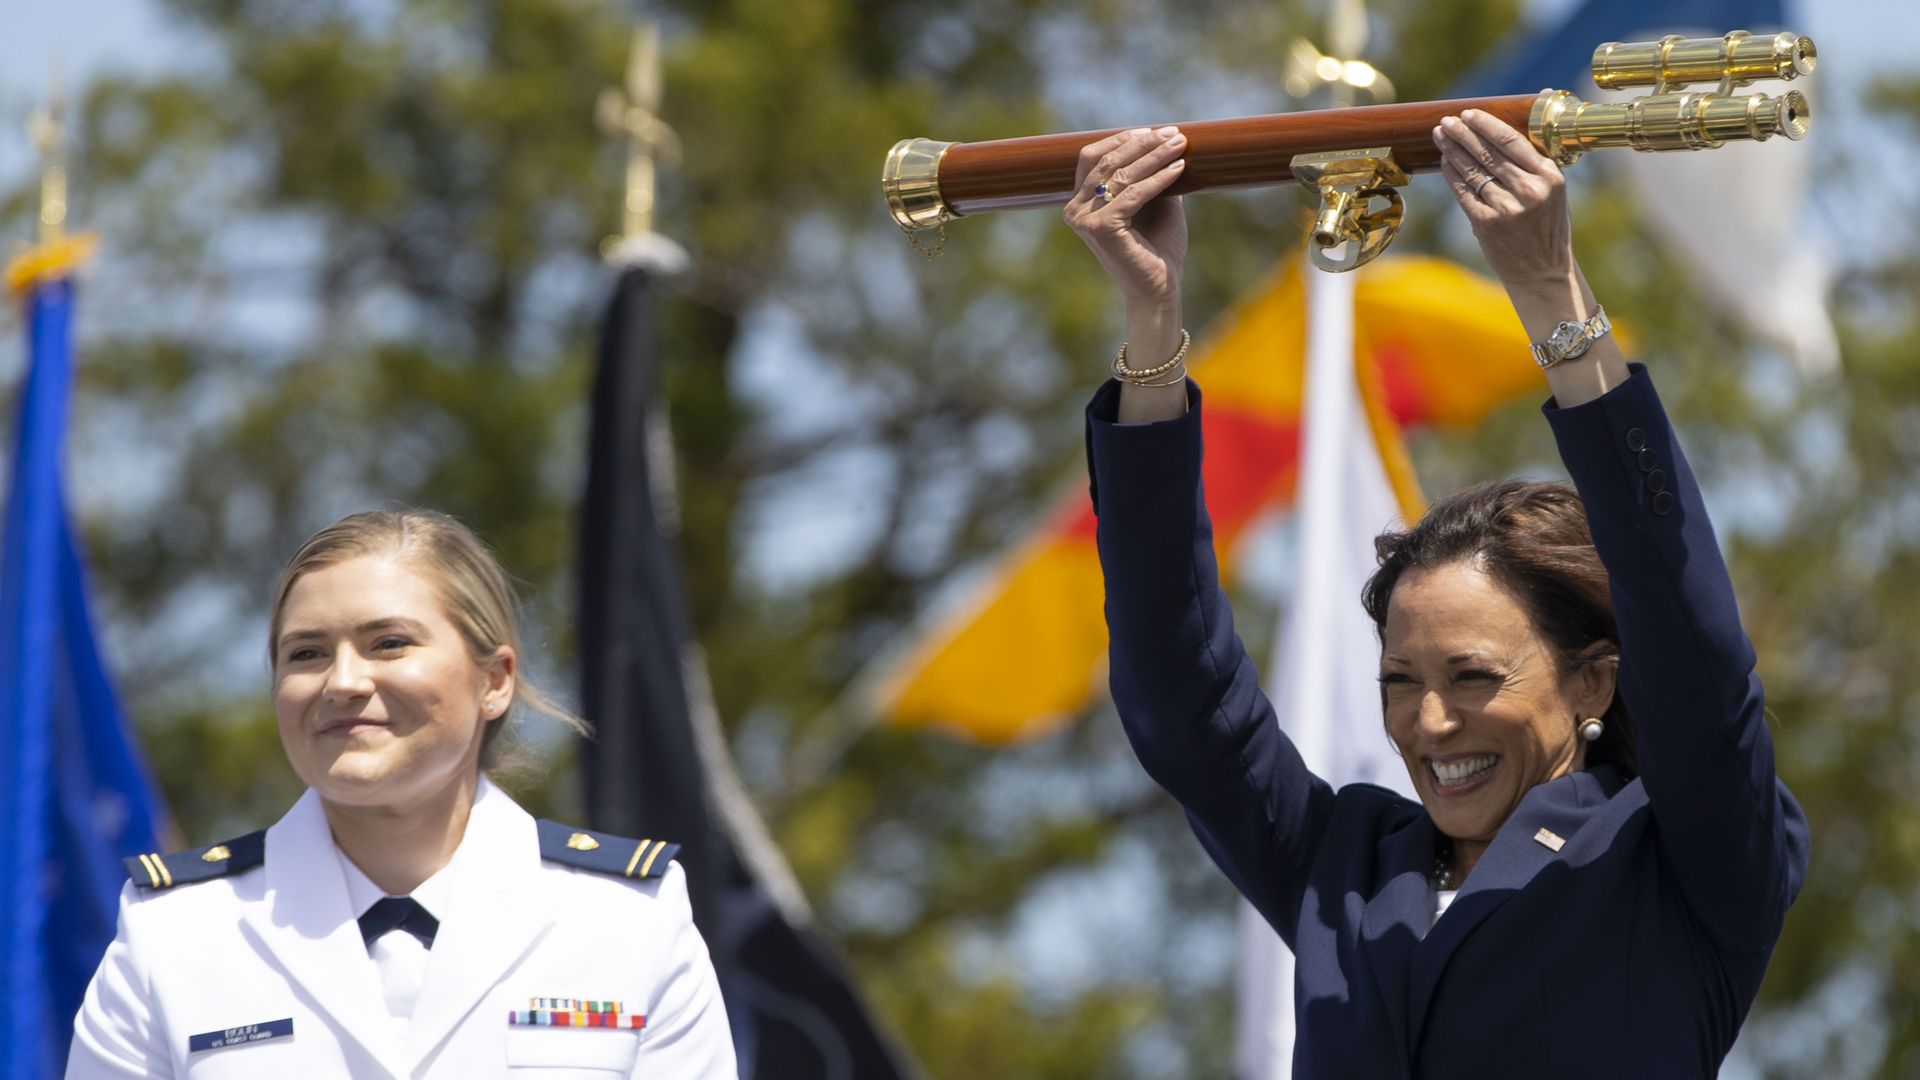 Vice President Kamala Harris is seen holding up a gift given to her as she addressed the Coast Guard Academy graduation ceremony.